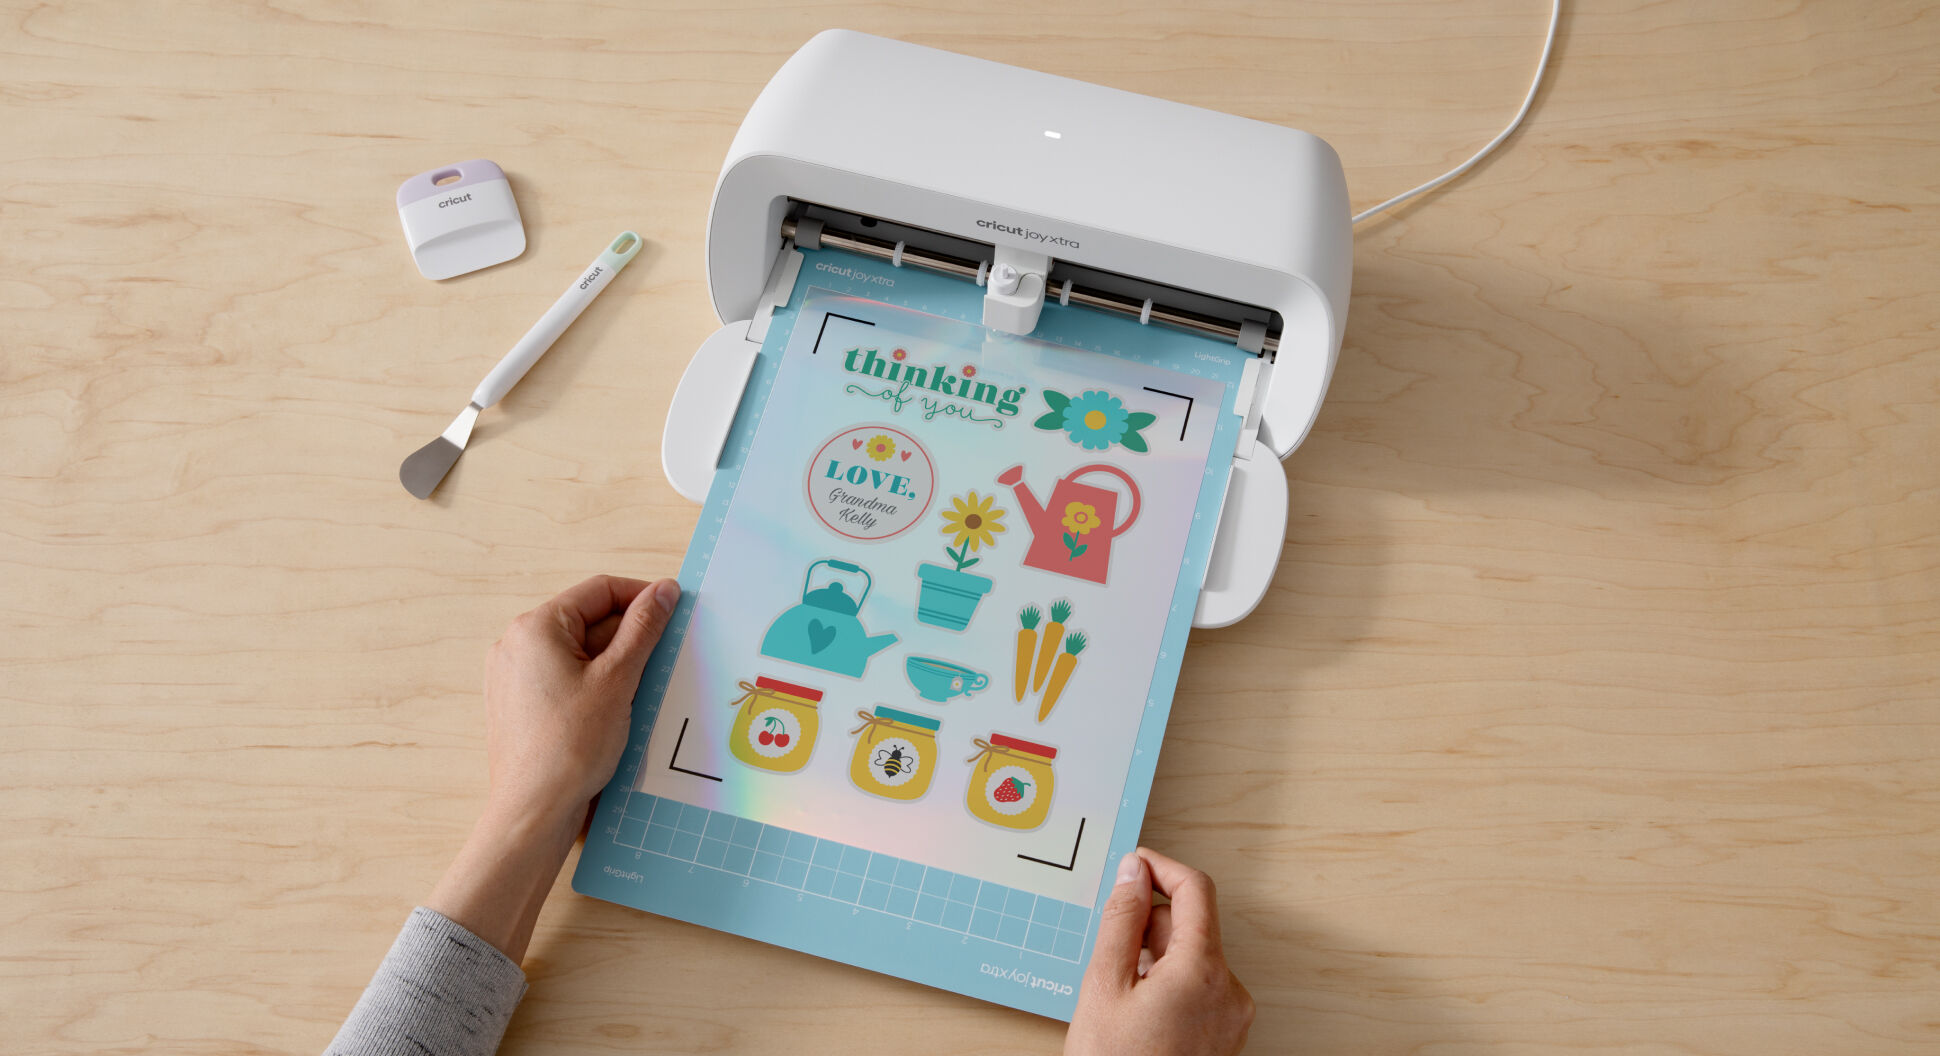 Cricut Maker review: Extremely versatile machine that needs software  innovation - General Discussion Discussions on AppleInsider Forums